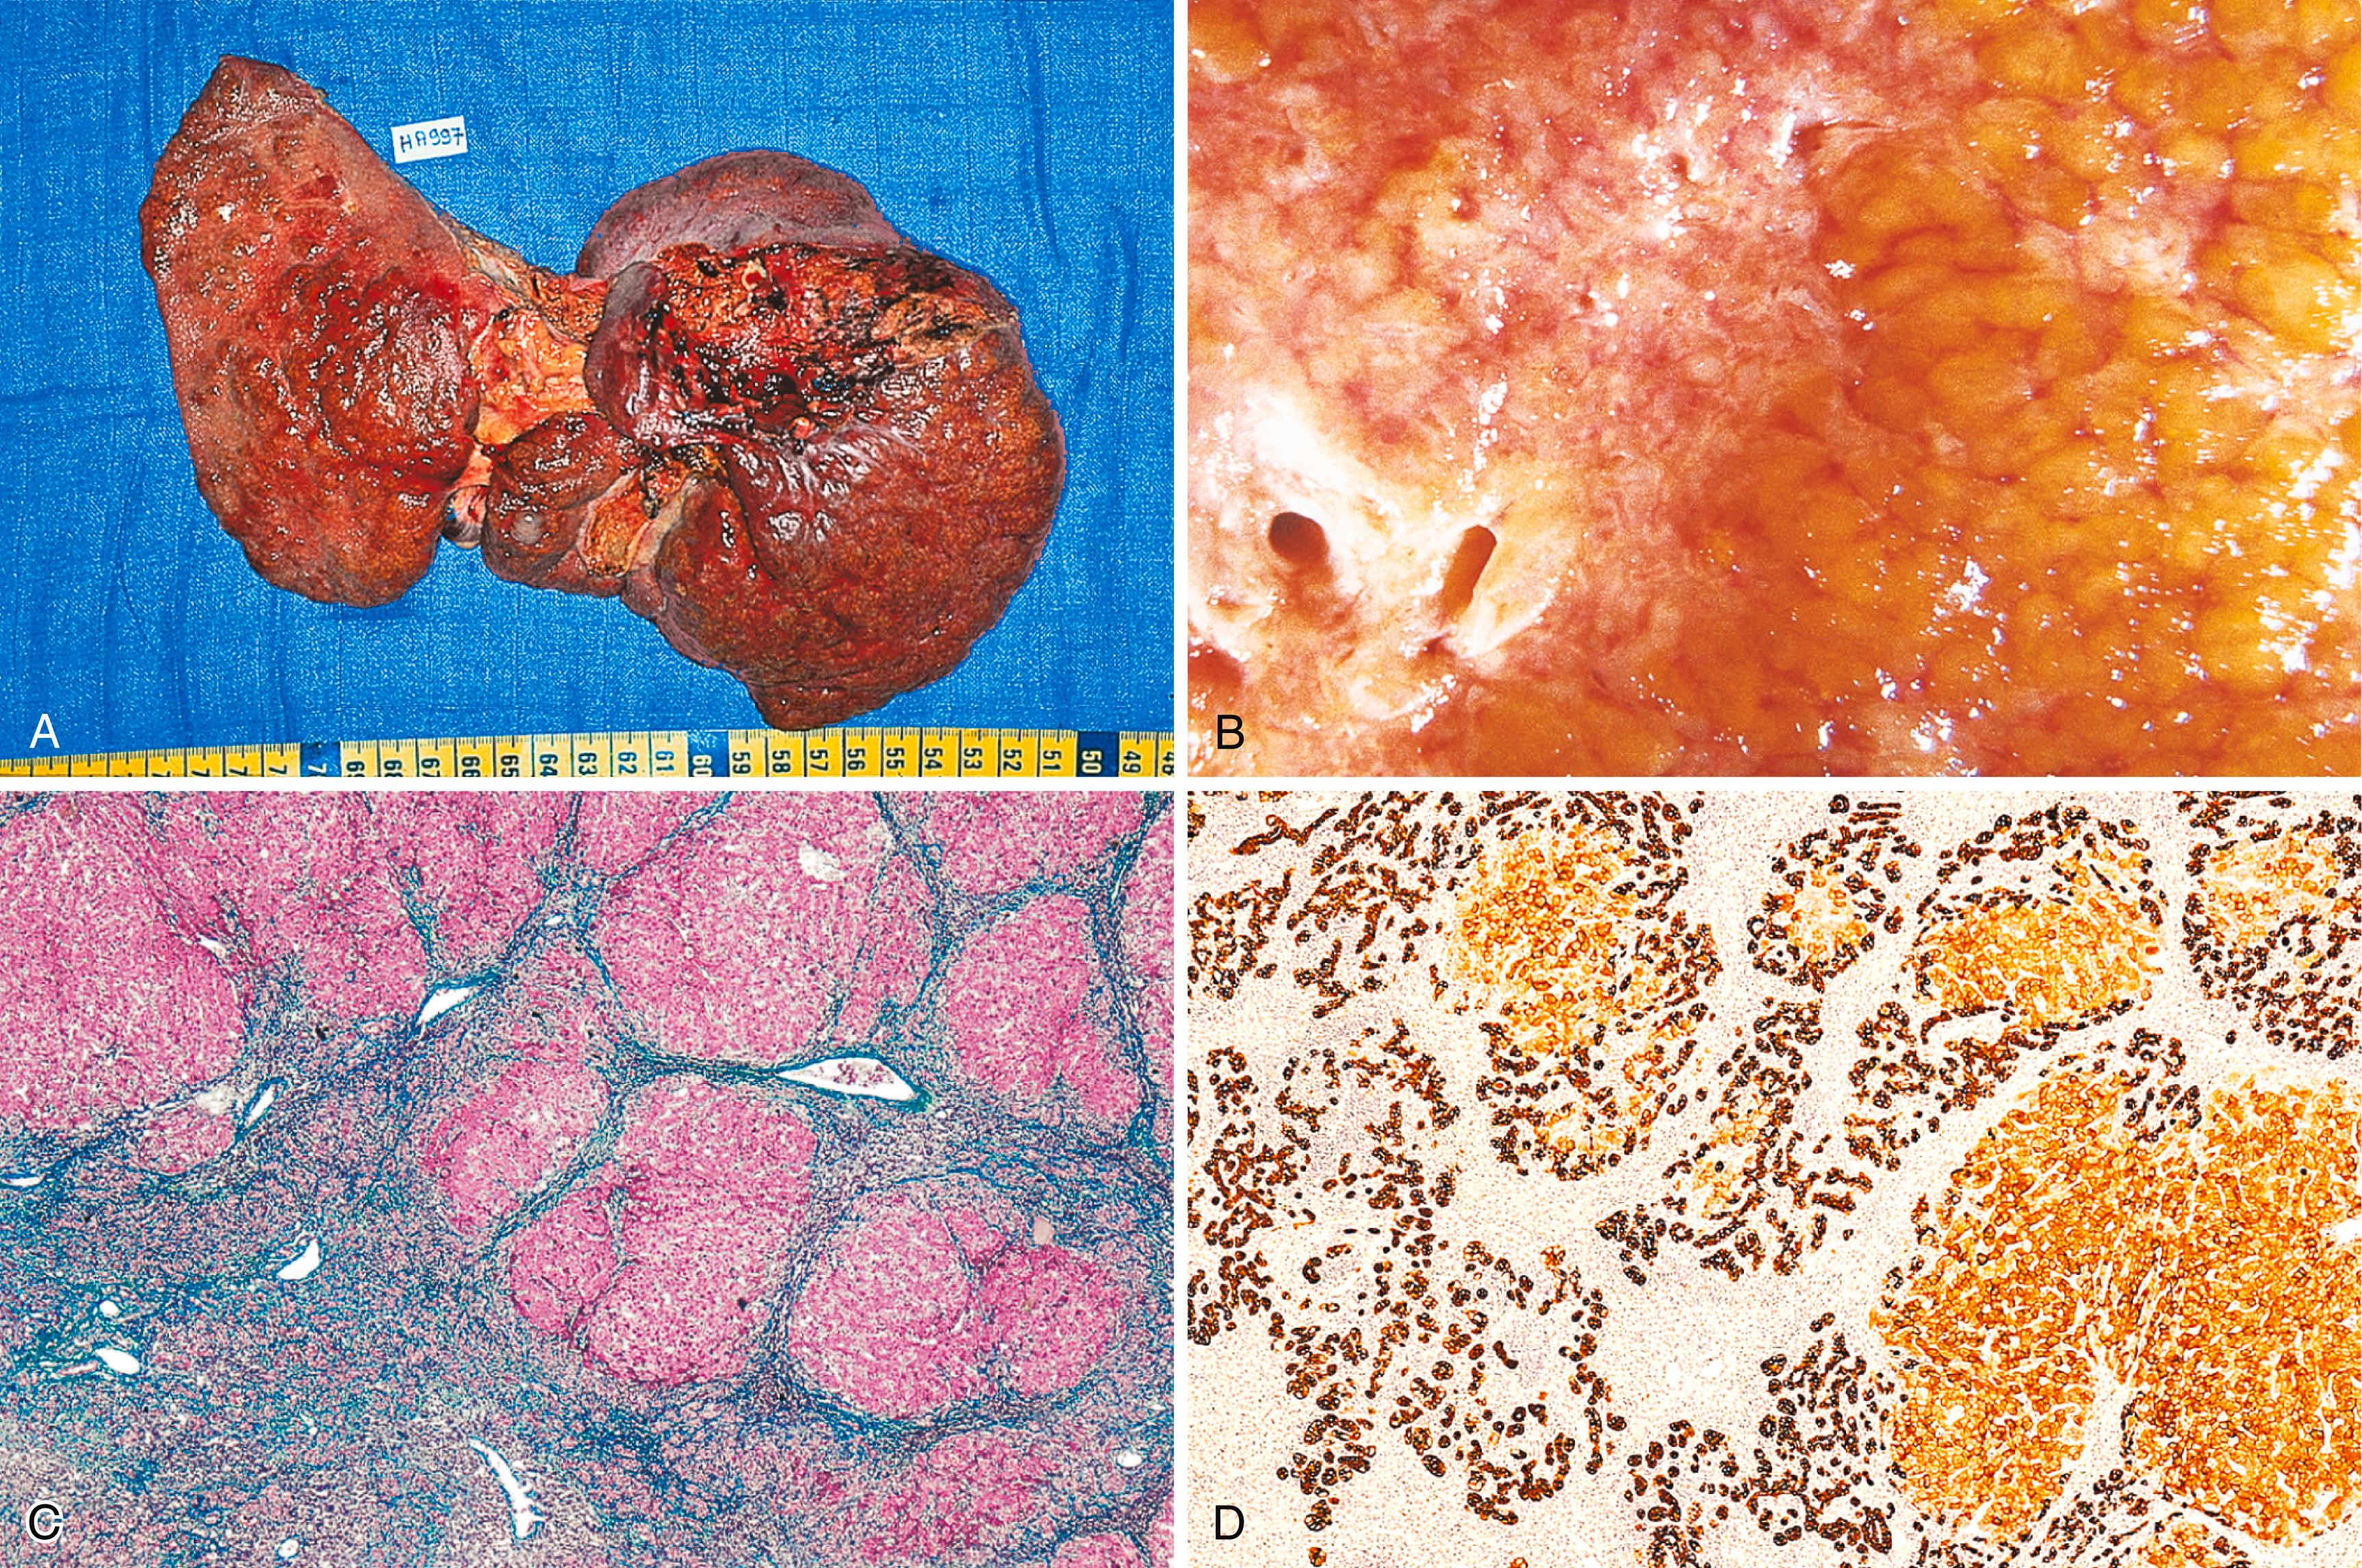 FIGURE 49.4, Subfulminant hepatitis in a 47-year-old woman who took alpidem (Ananxyl) for 6 months (150 mg/day).